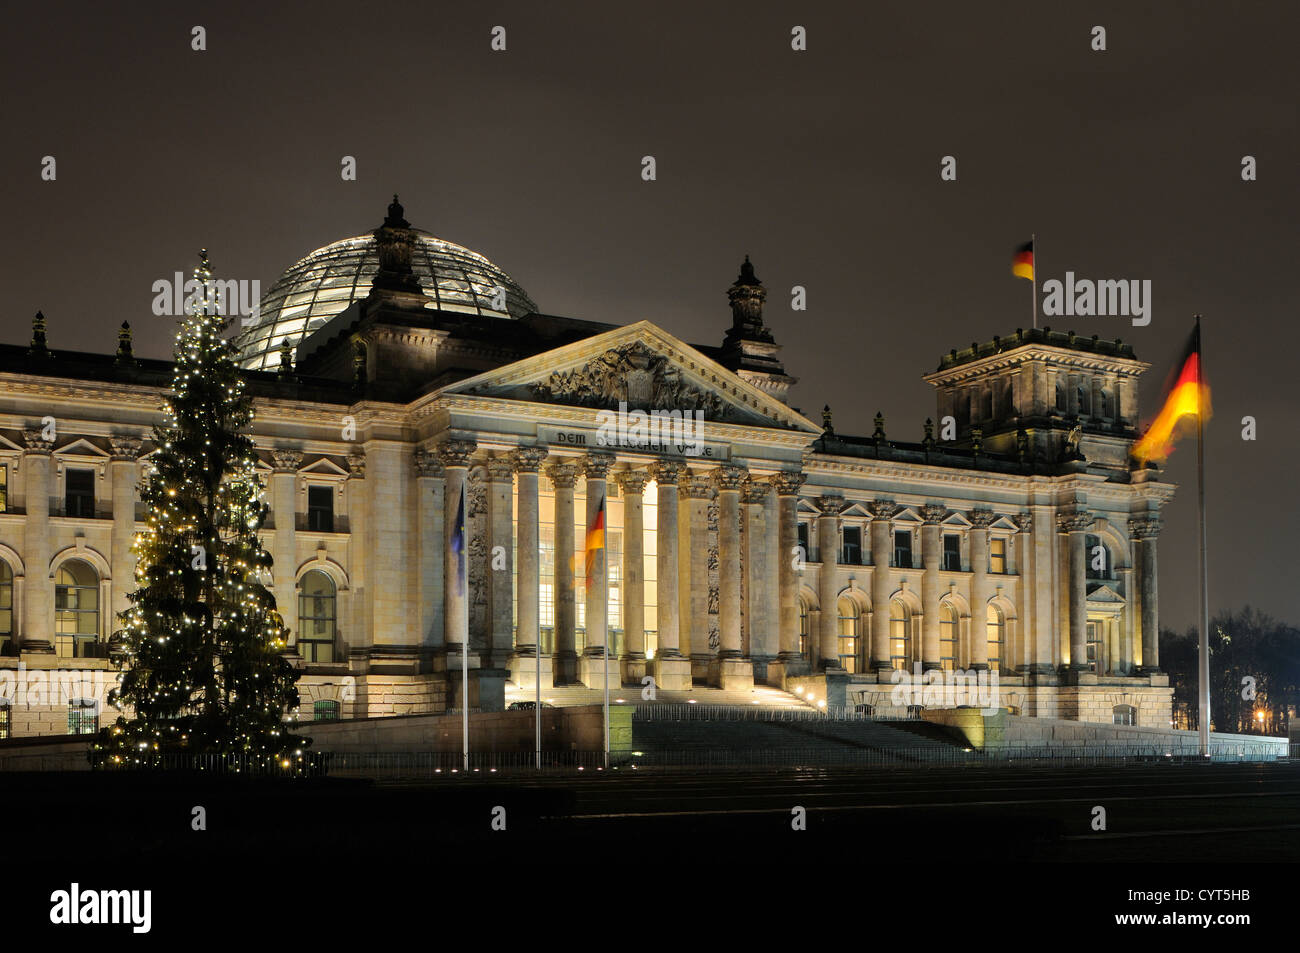 Reichstag parliament building at Christmas season with Christmas tree and German flag, Berlin, Germany, Europe Stock Photo